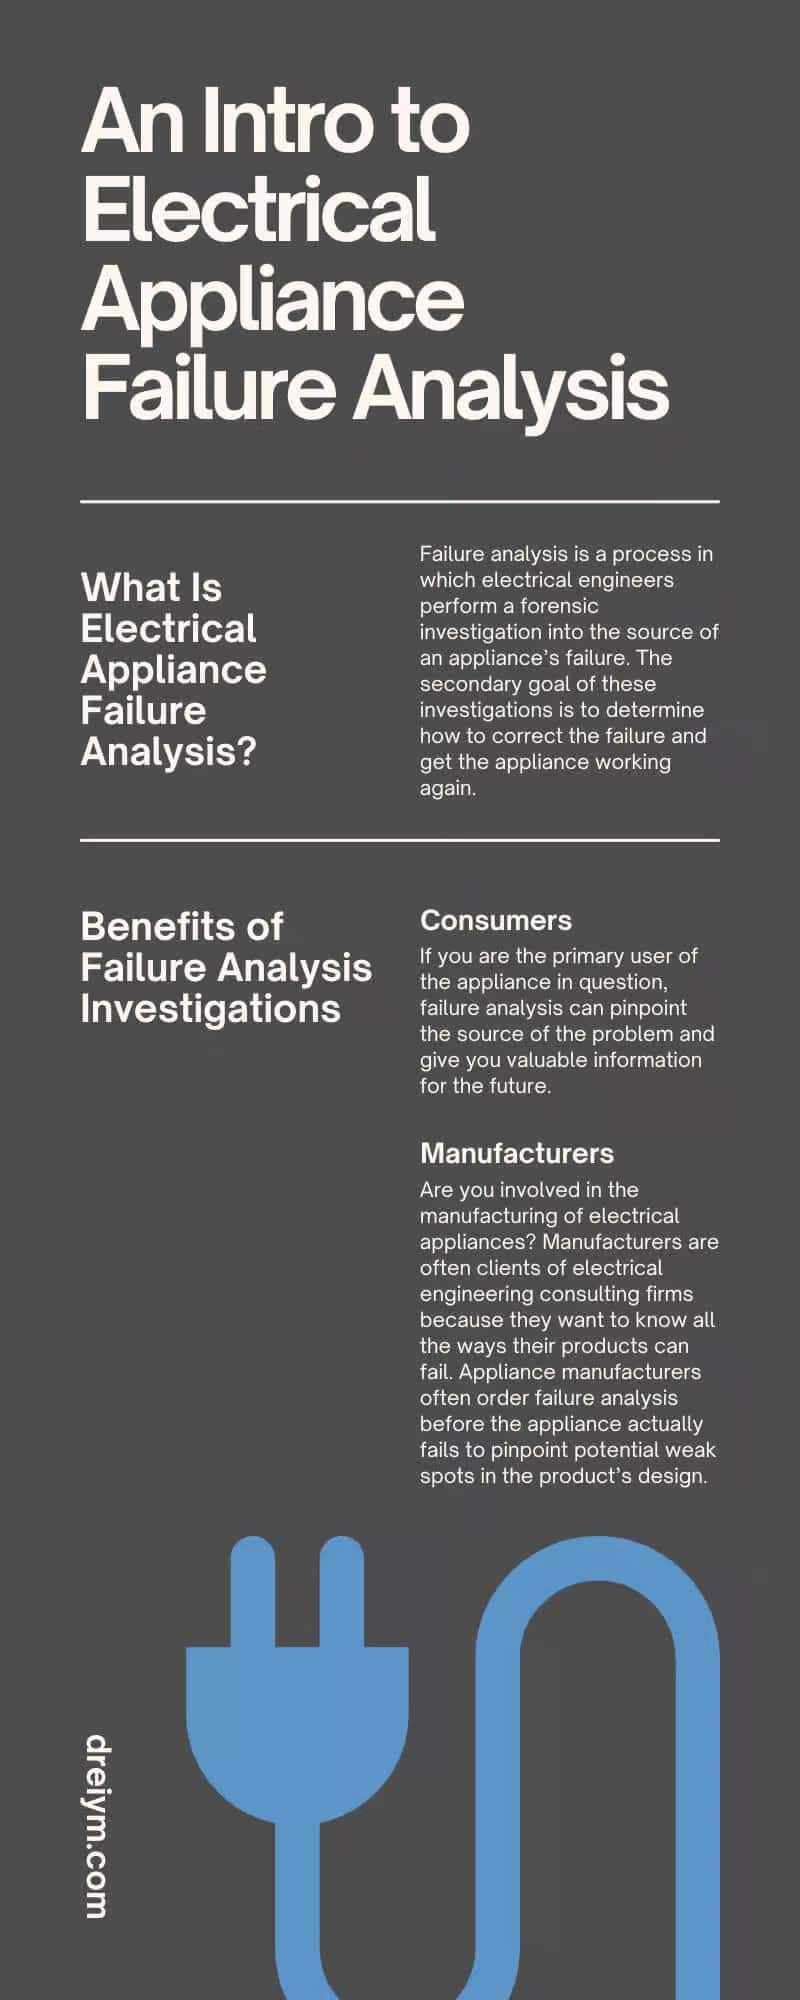 An Intro to Electrical Appliance Failure Analysis 